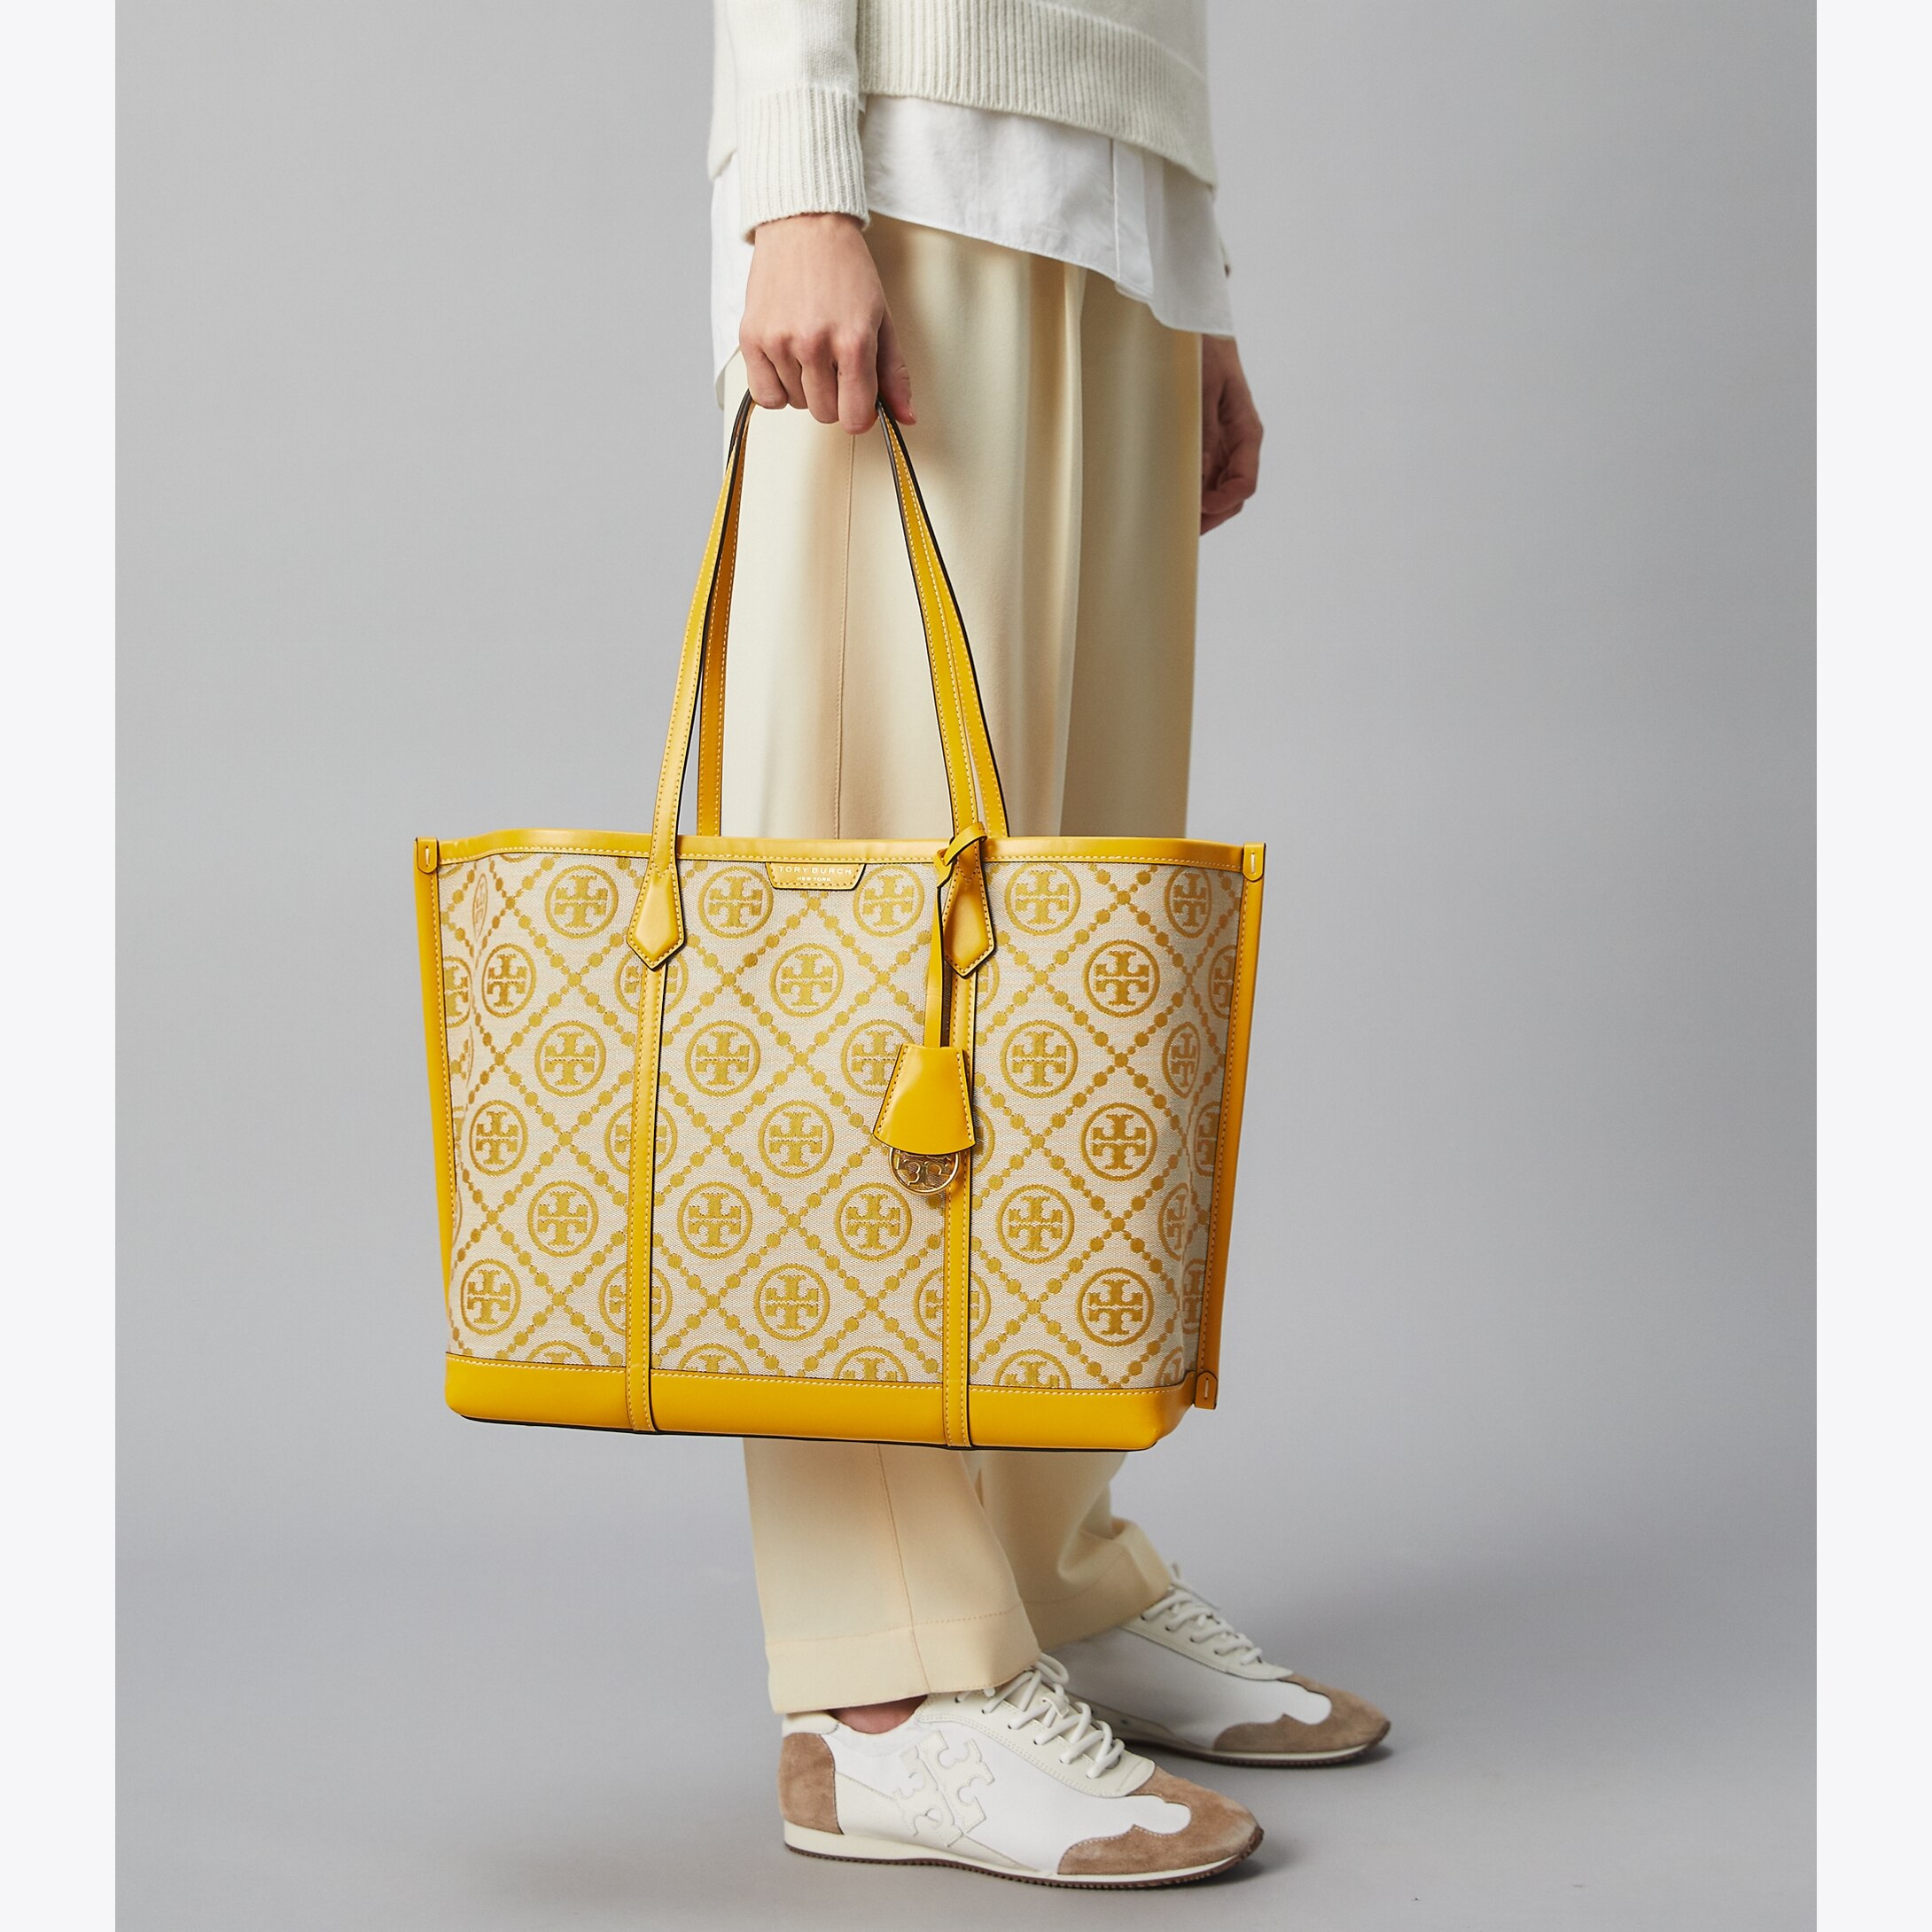 Tory Burch - The Perry Triple-Compartment Tote Shop all must-have